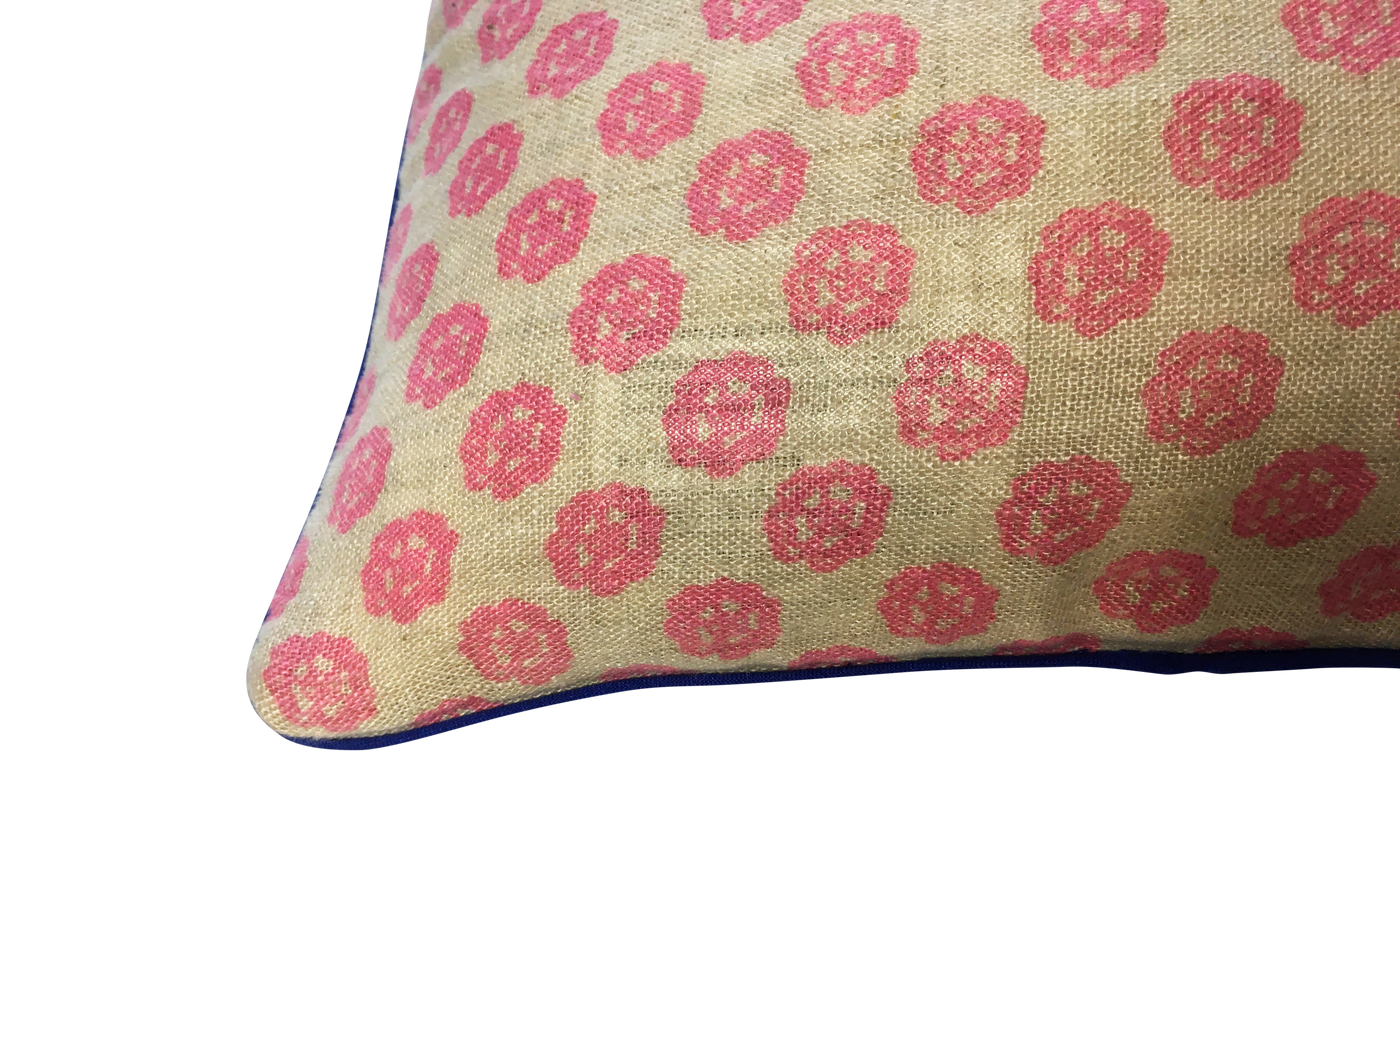 kitty-holmes-pink-clover-print-cushion-cover with-bright-blue-piping